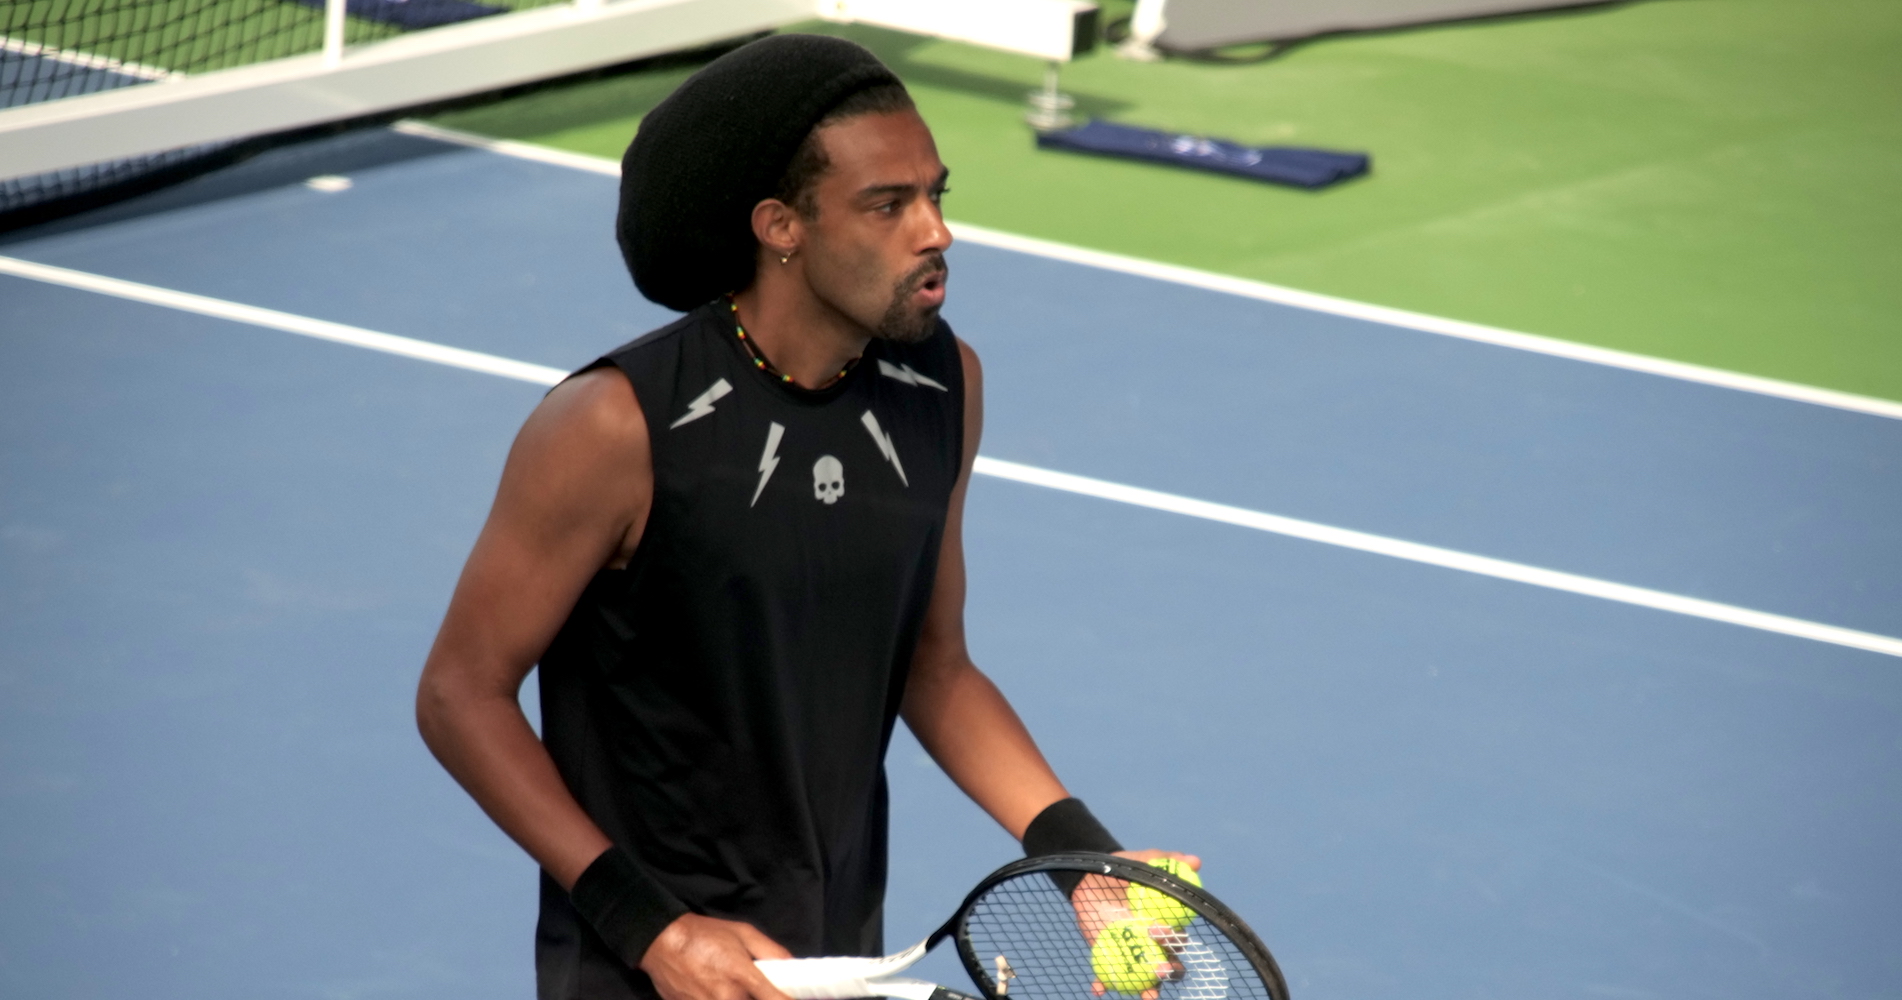 Dustin Brown at UTS1, June 2020, Mouratoglou Tennis Academy